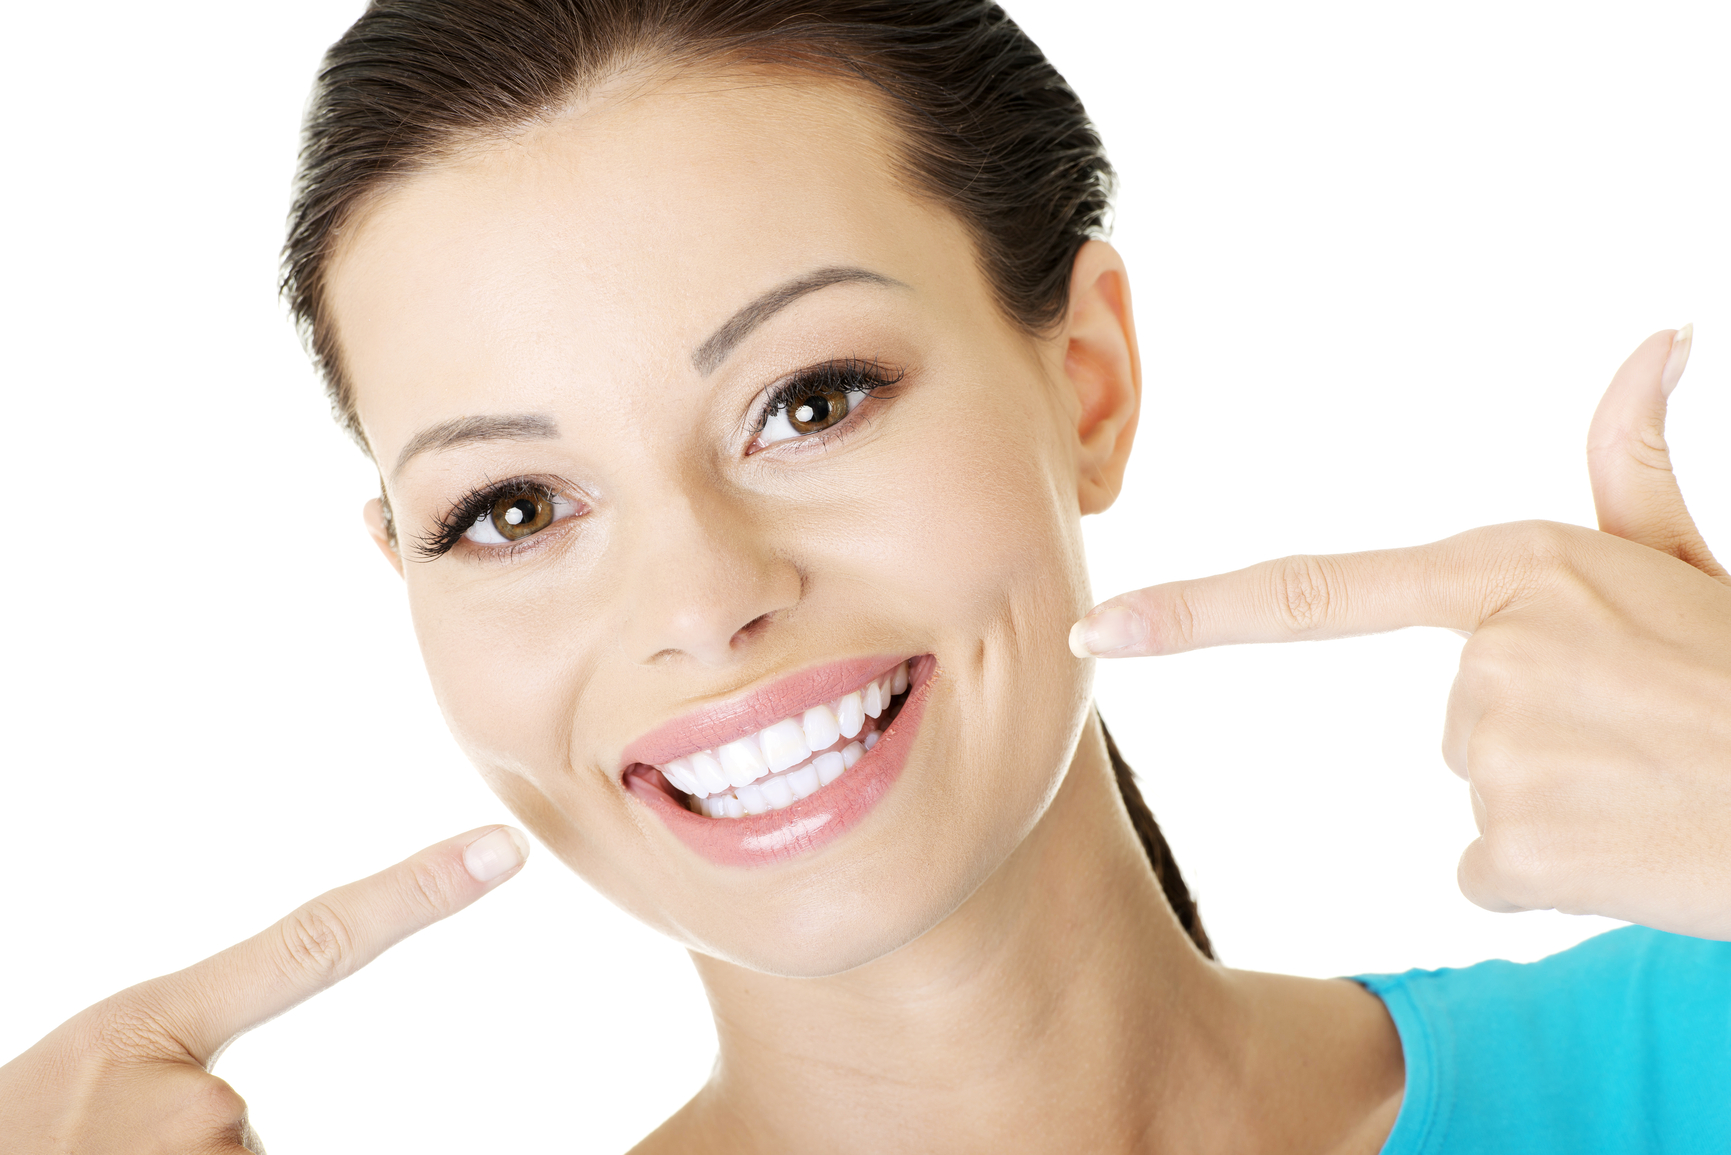 We are the best dentistry in Sydney for composite veneers.